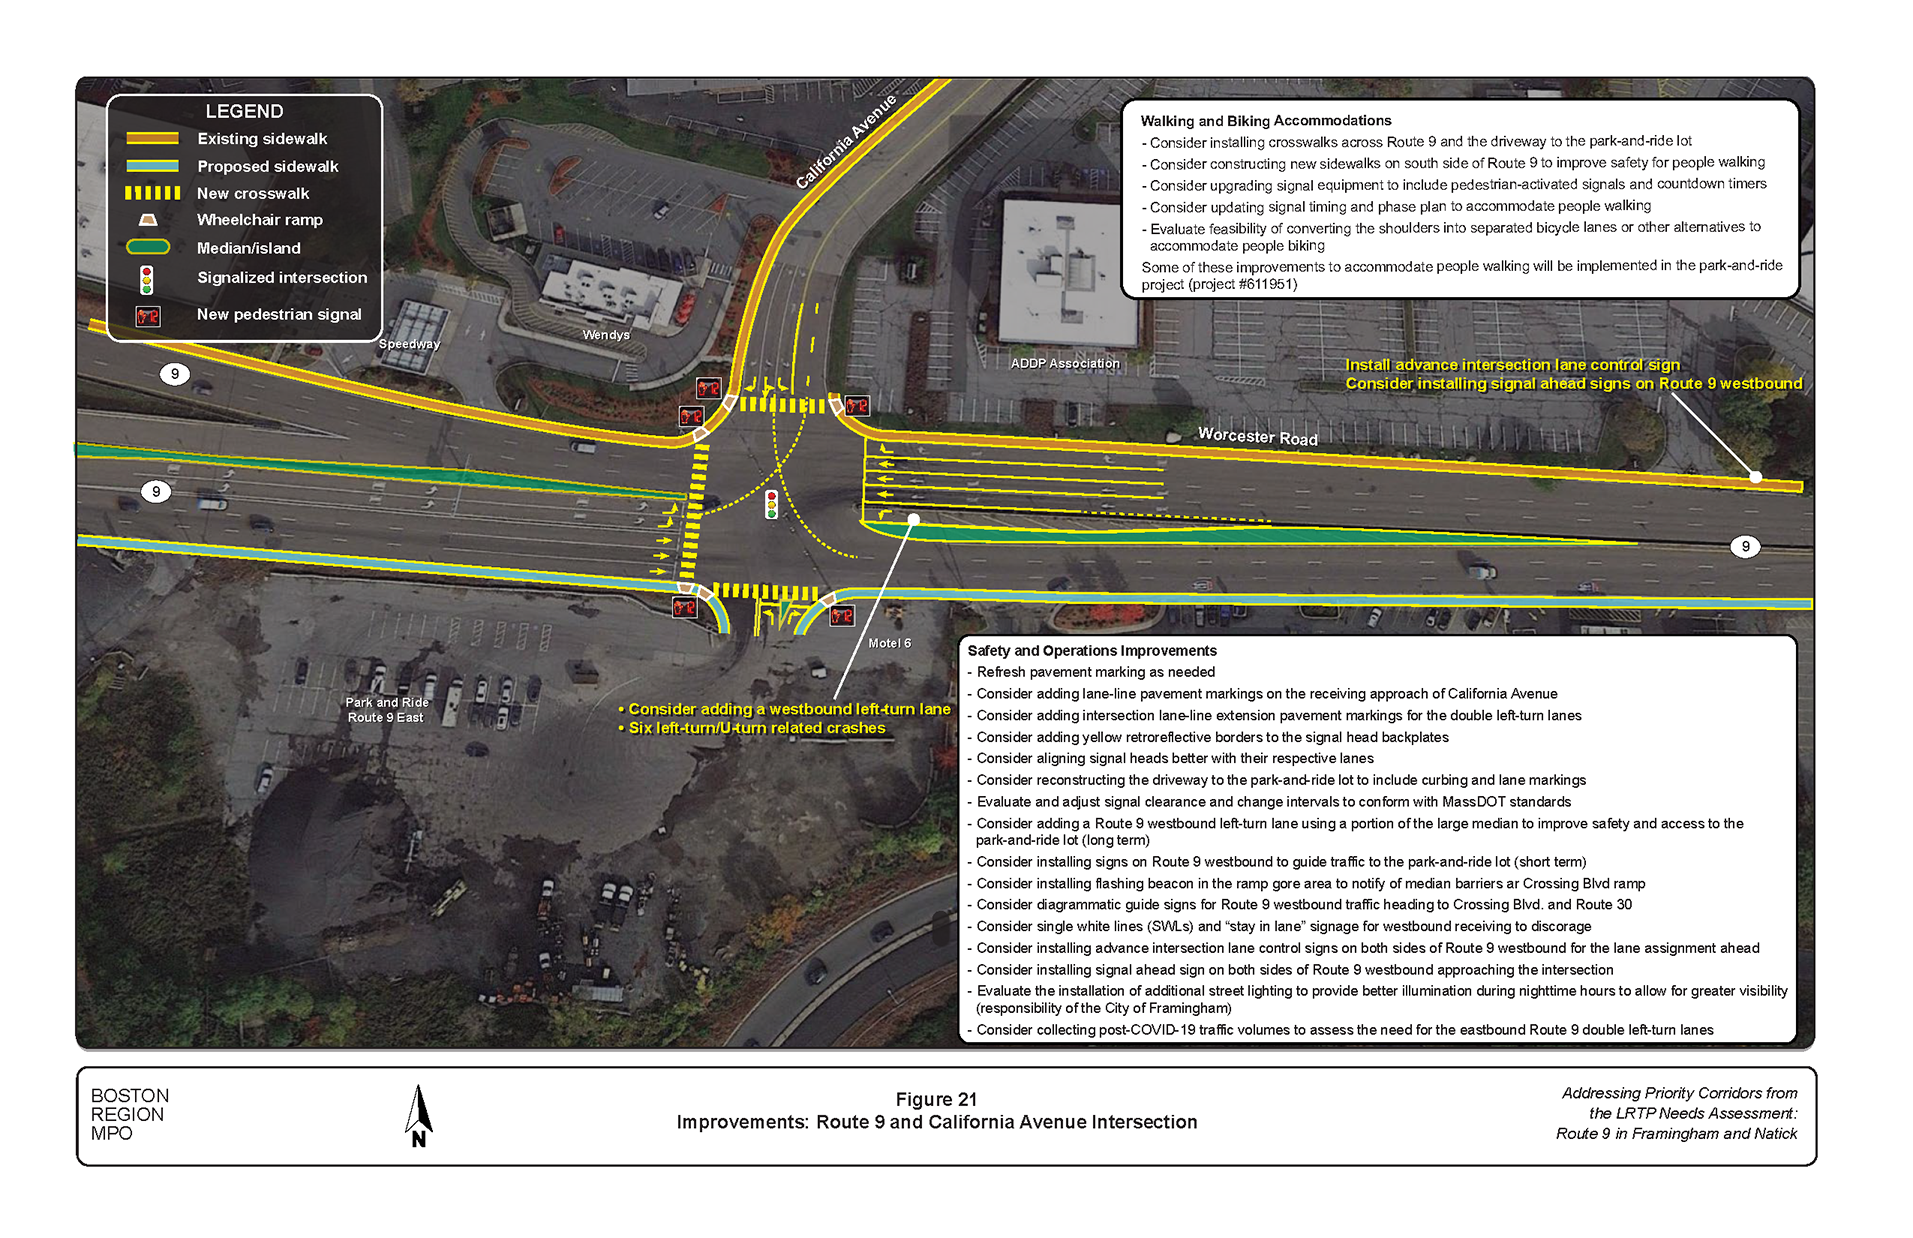 Figure 21 is an aerial photo showing the intersection of Route 9 and California Avenue and the improvements